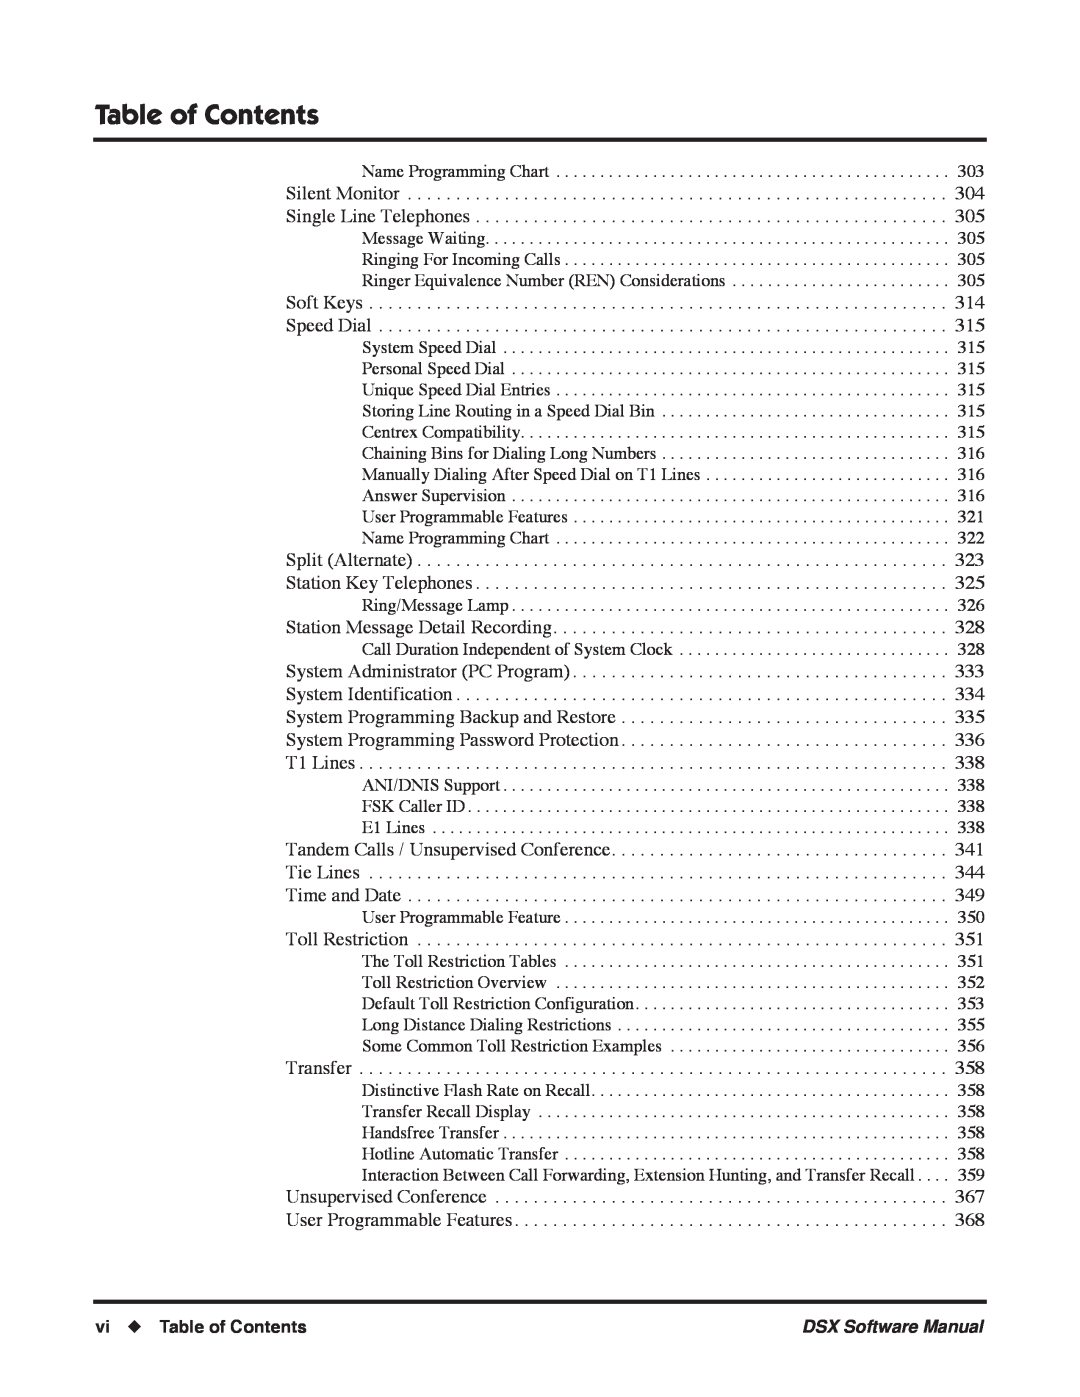 NEC N 1093100, P software manual vi Table of Contents 